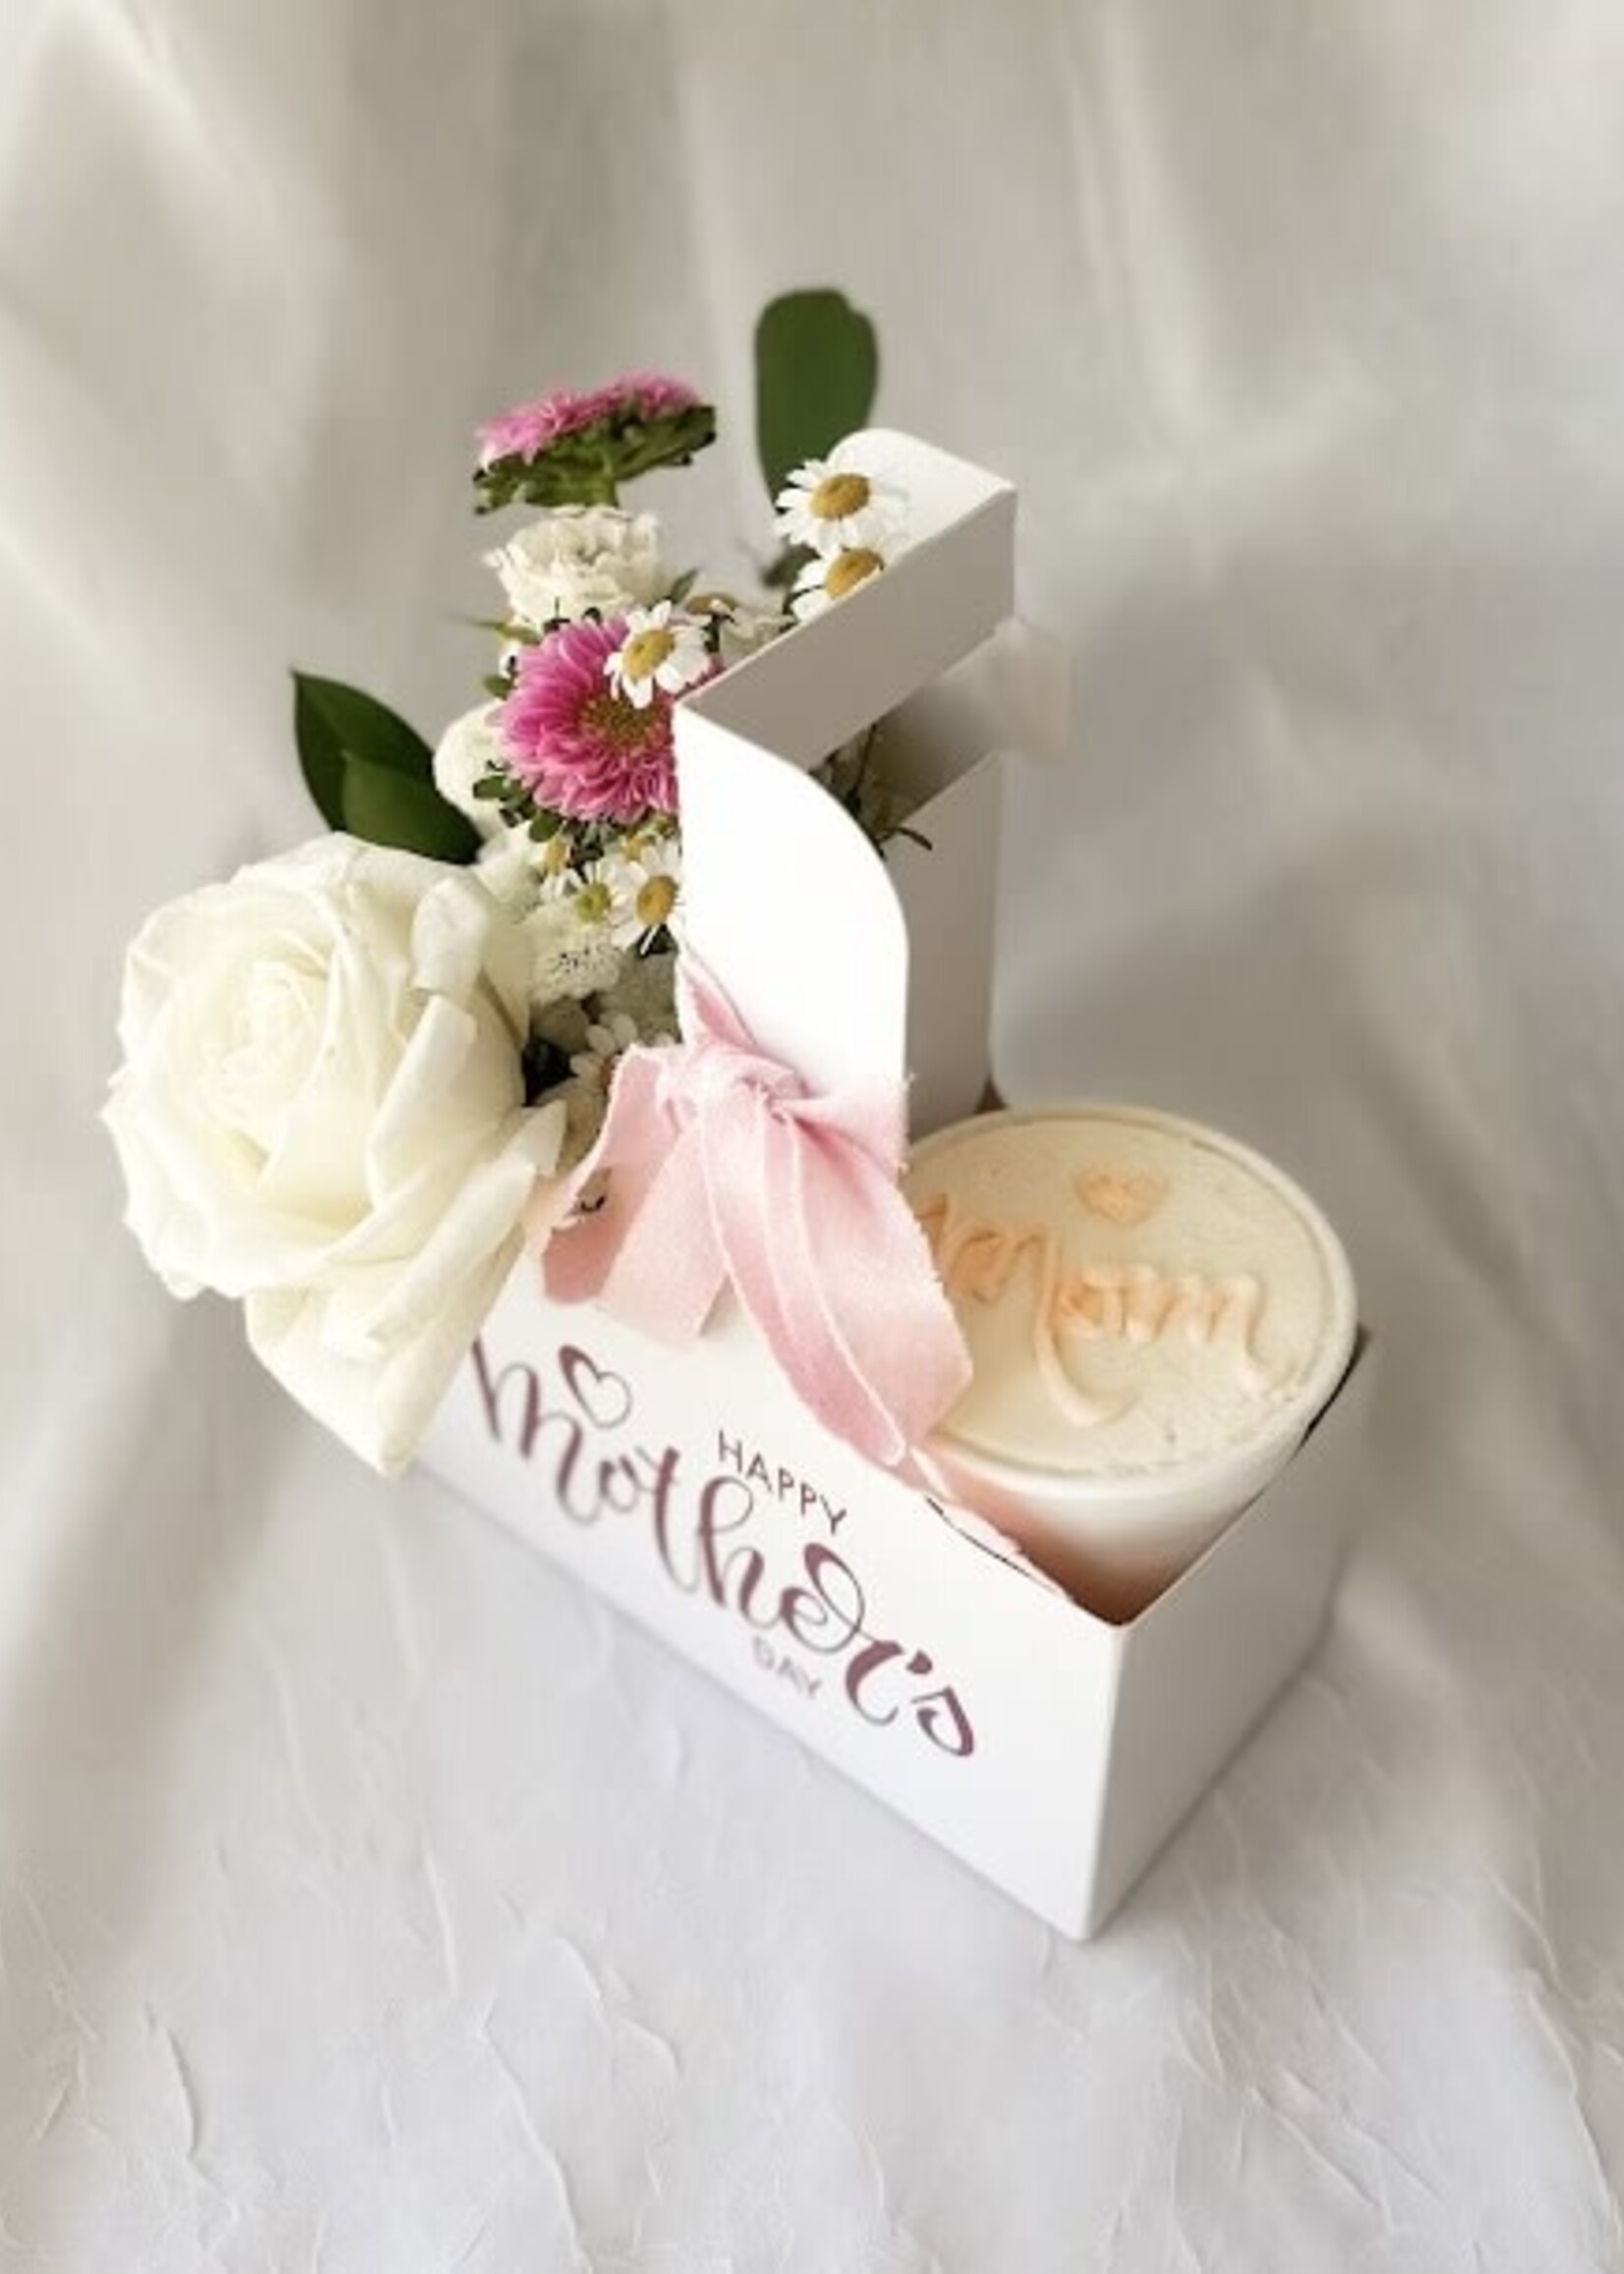 Creative Twist Events Mother’s Day Cake & Flowers to-go